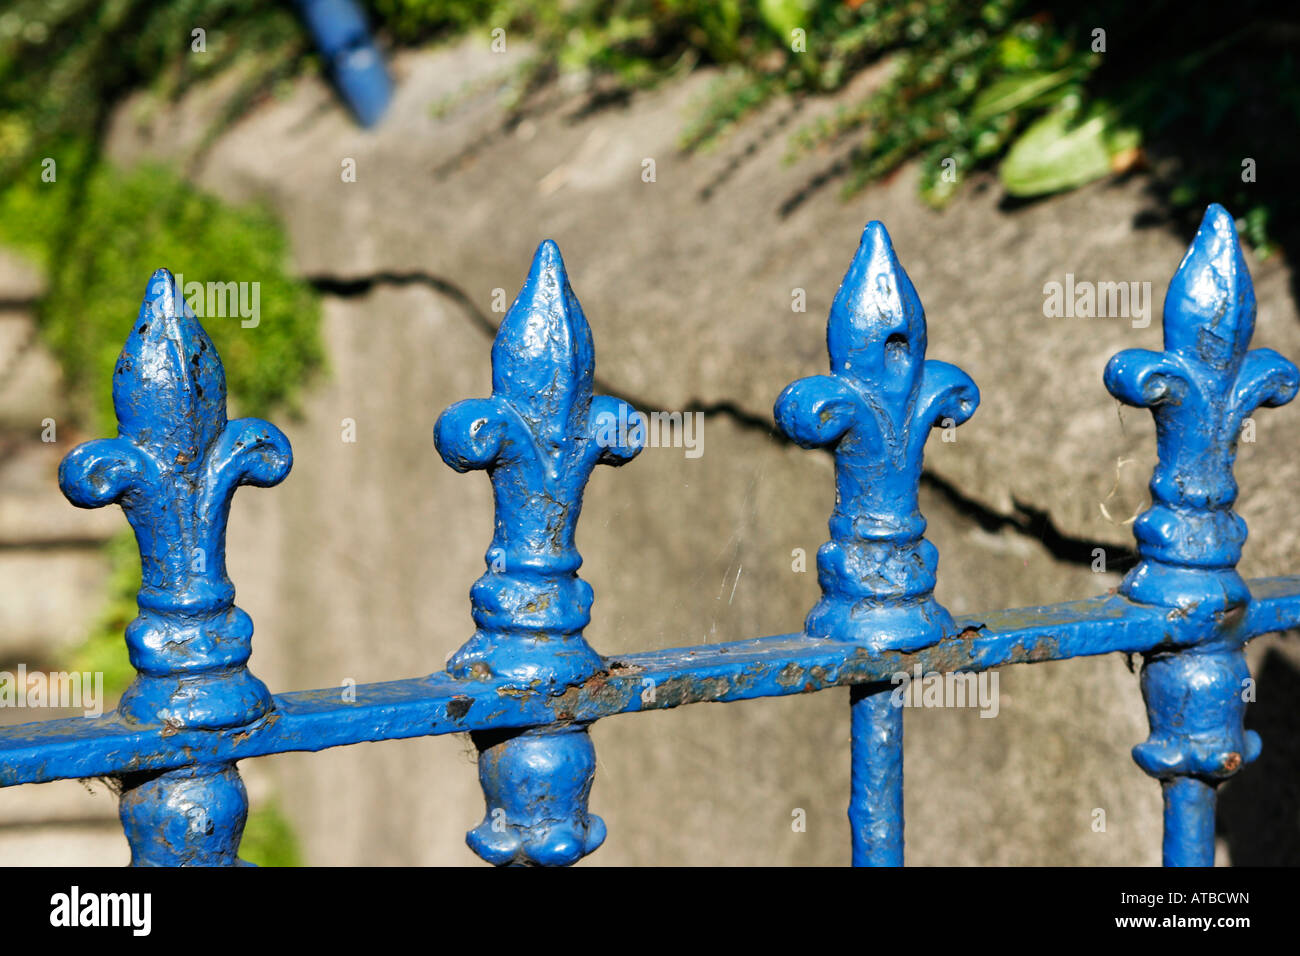 Blue railings on a front gate entrance to garden Stock Photo